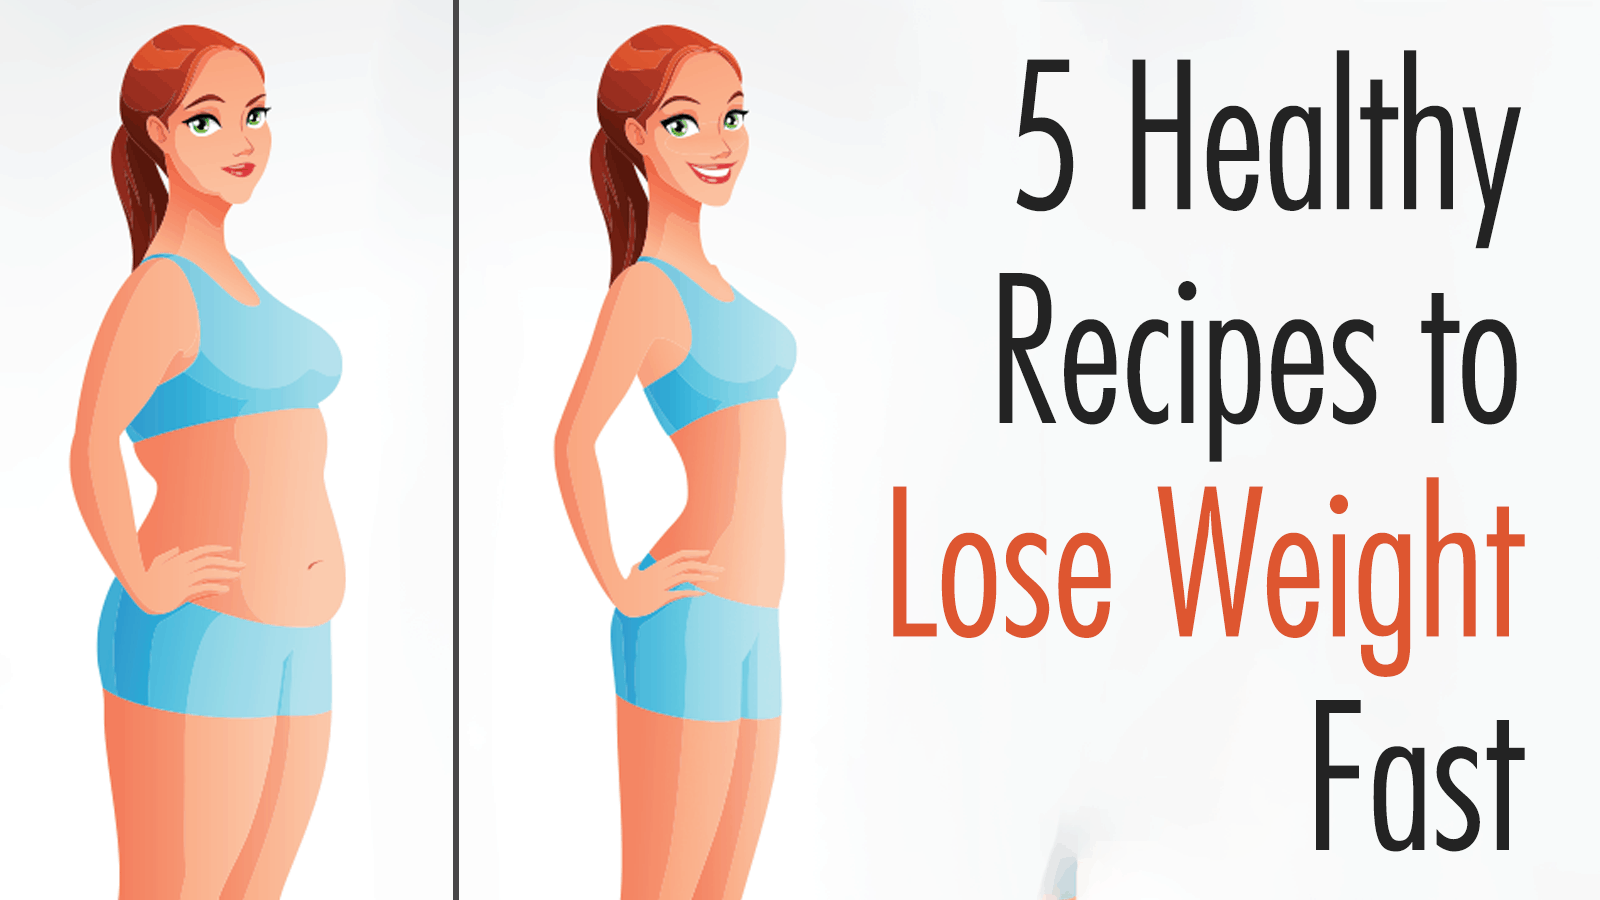 5 Healthy Recipes to Lose Weight Fast